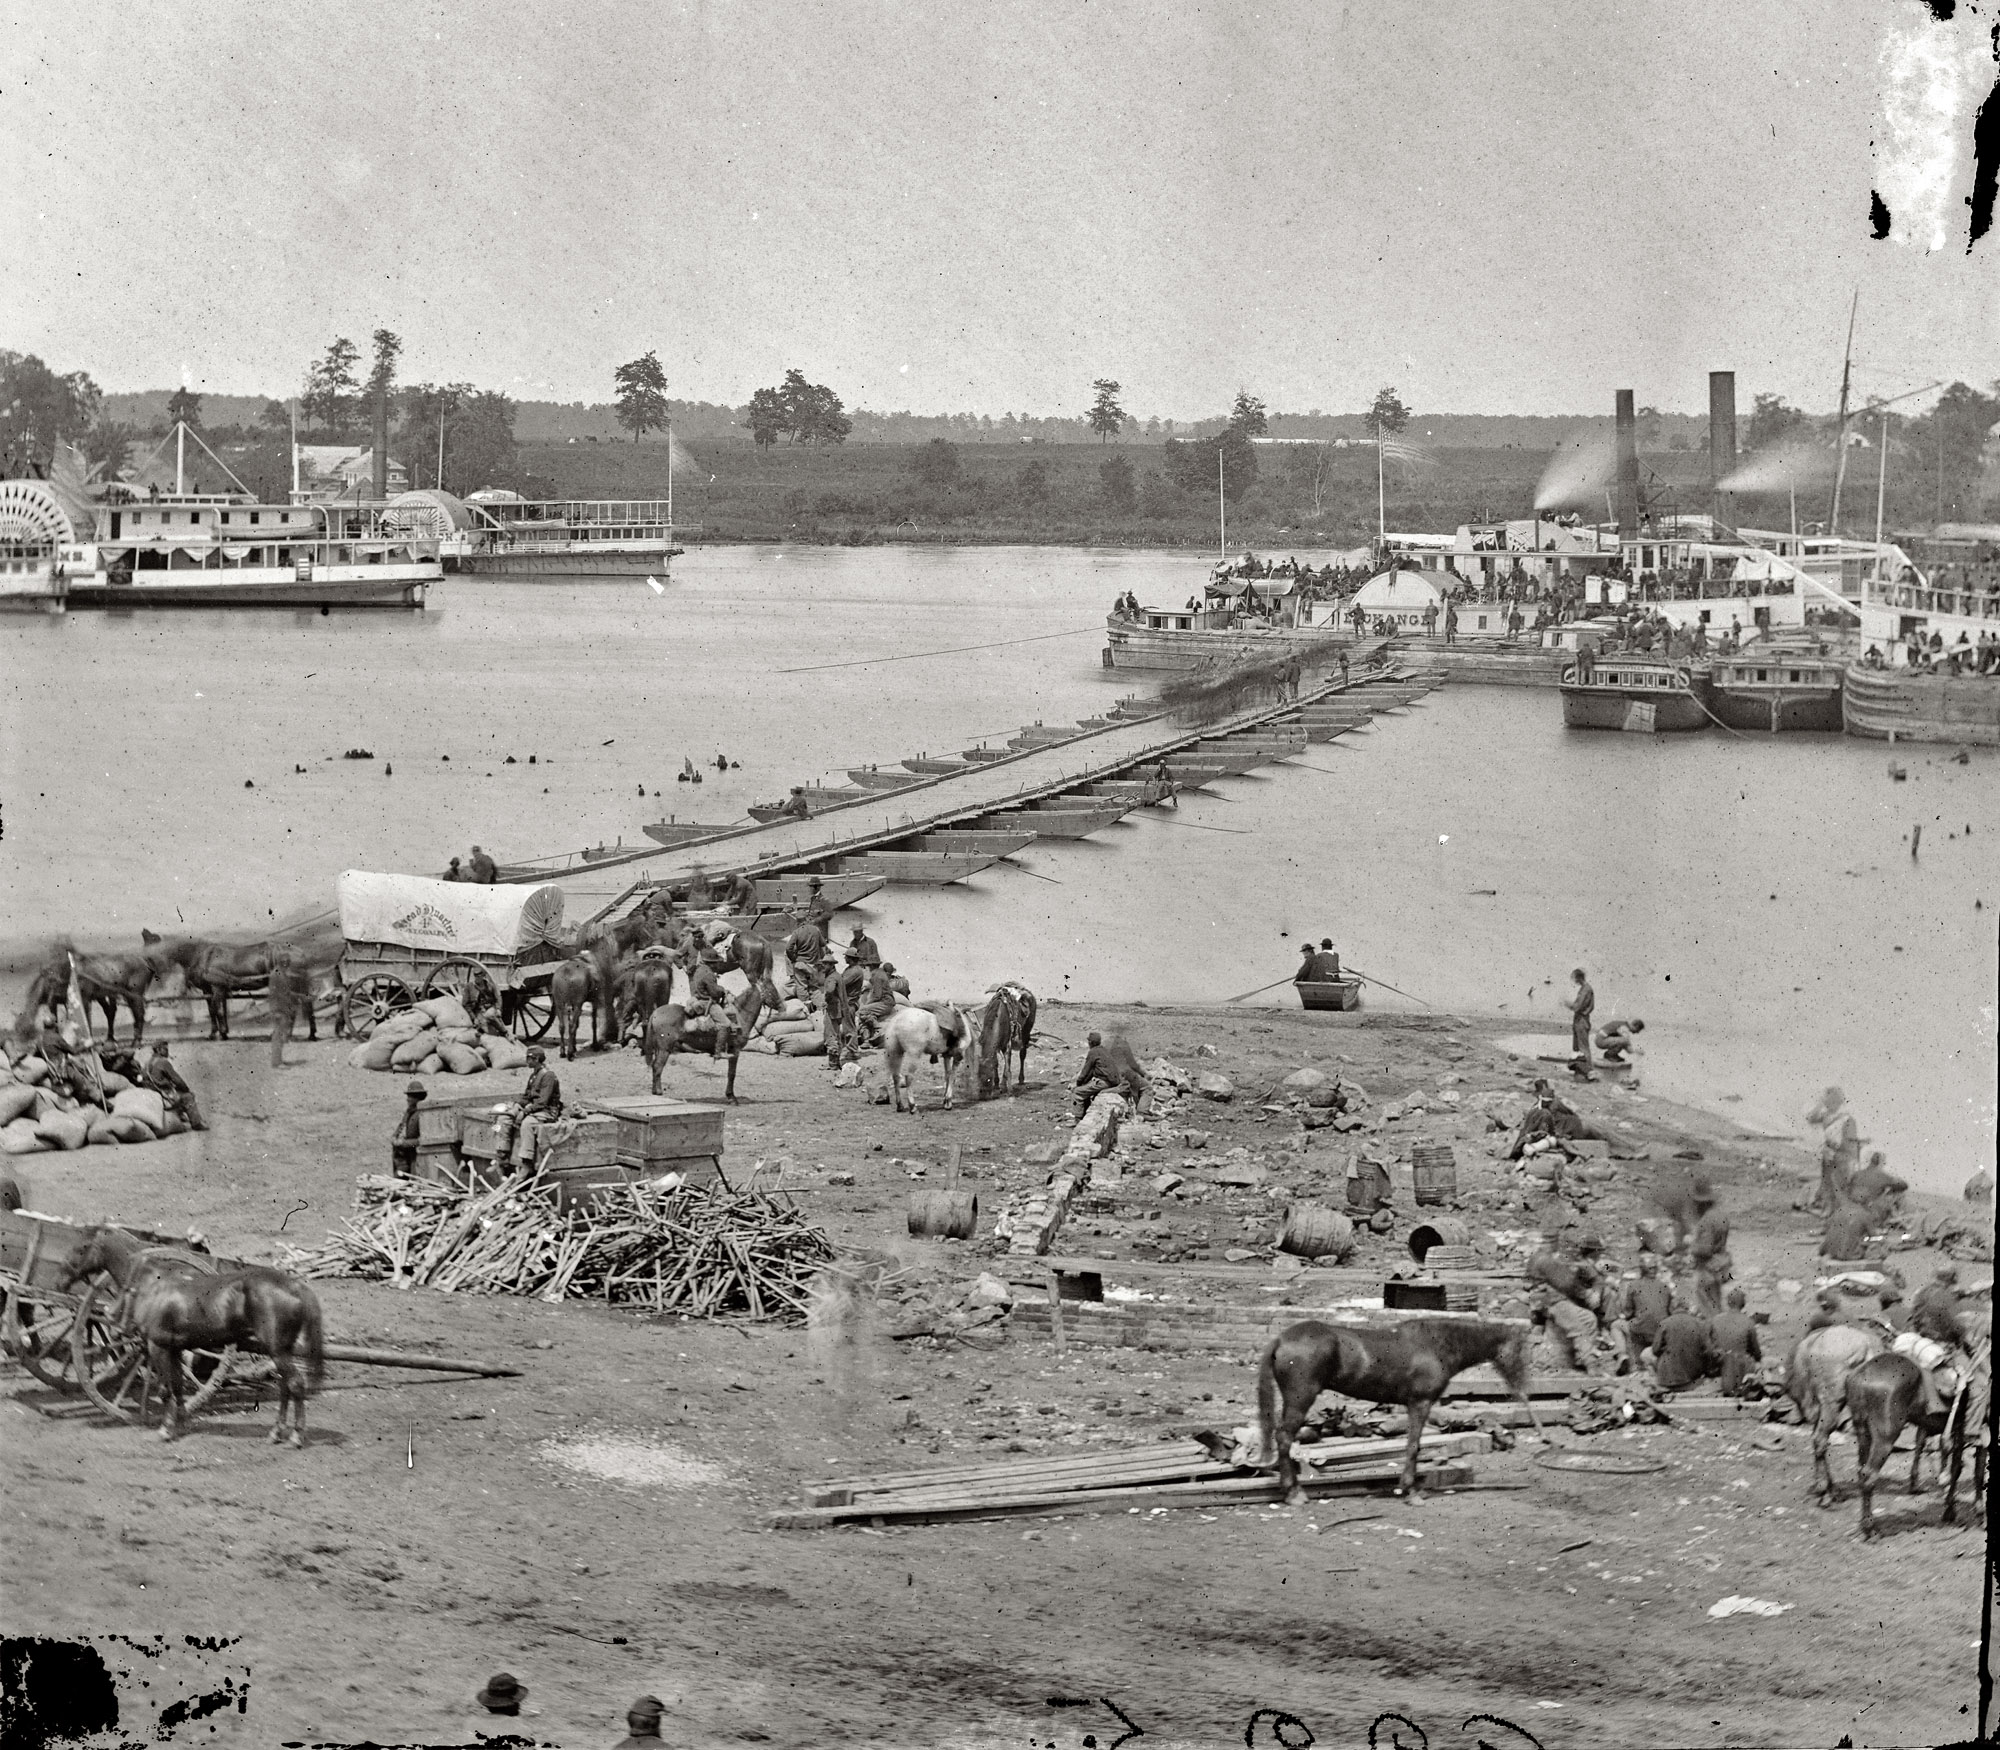 May 30, 1864. "Port Royal, Virginia. The Rappahannock River front during the evacuation." Photograph from the main Eastern theater of war, Grant's Wilderness Campaign. Wet plate negative by Timothy O'Sullivan. View full size.